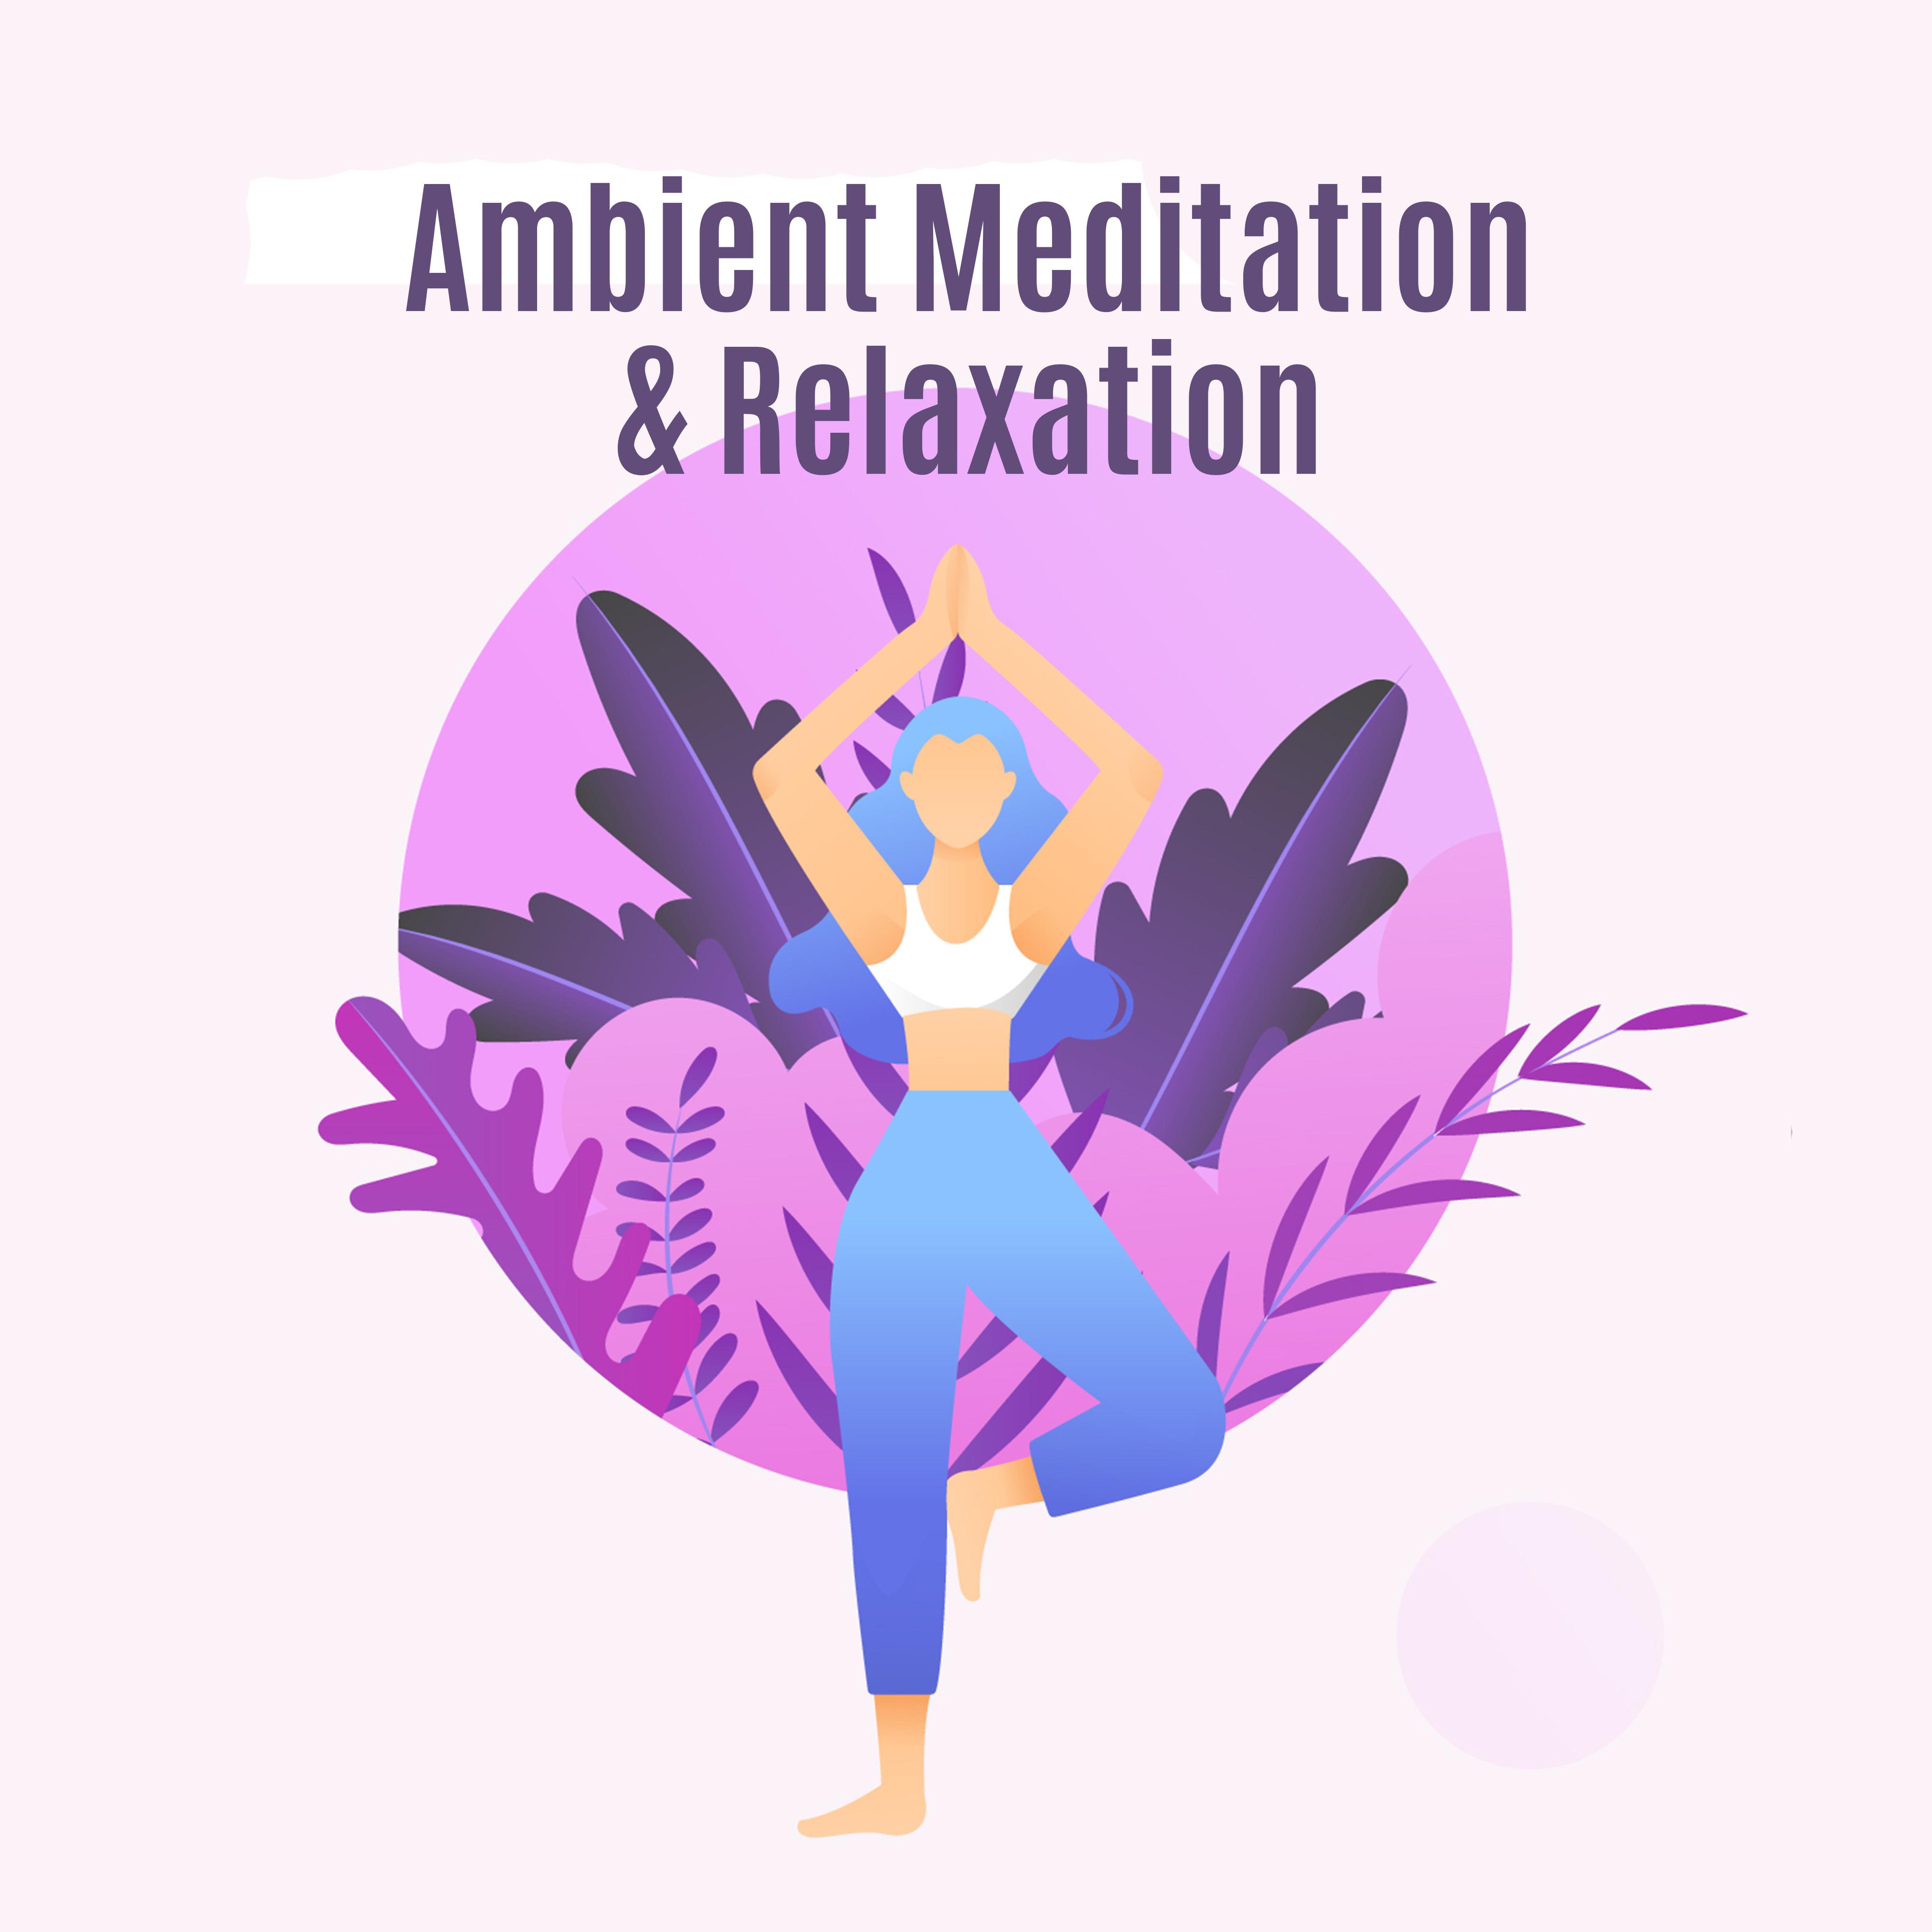 Ambient Meditation & Relaxation: Meditation Music Zone, Inner Harmony, Inner Focus, Yoga Music, Ambient Chill Out, Zen, Lounge